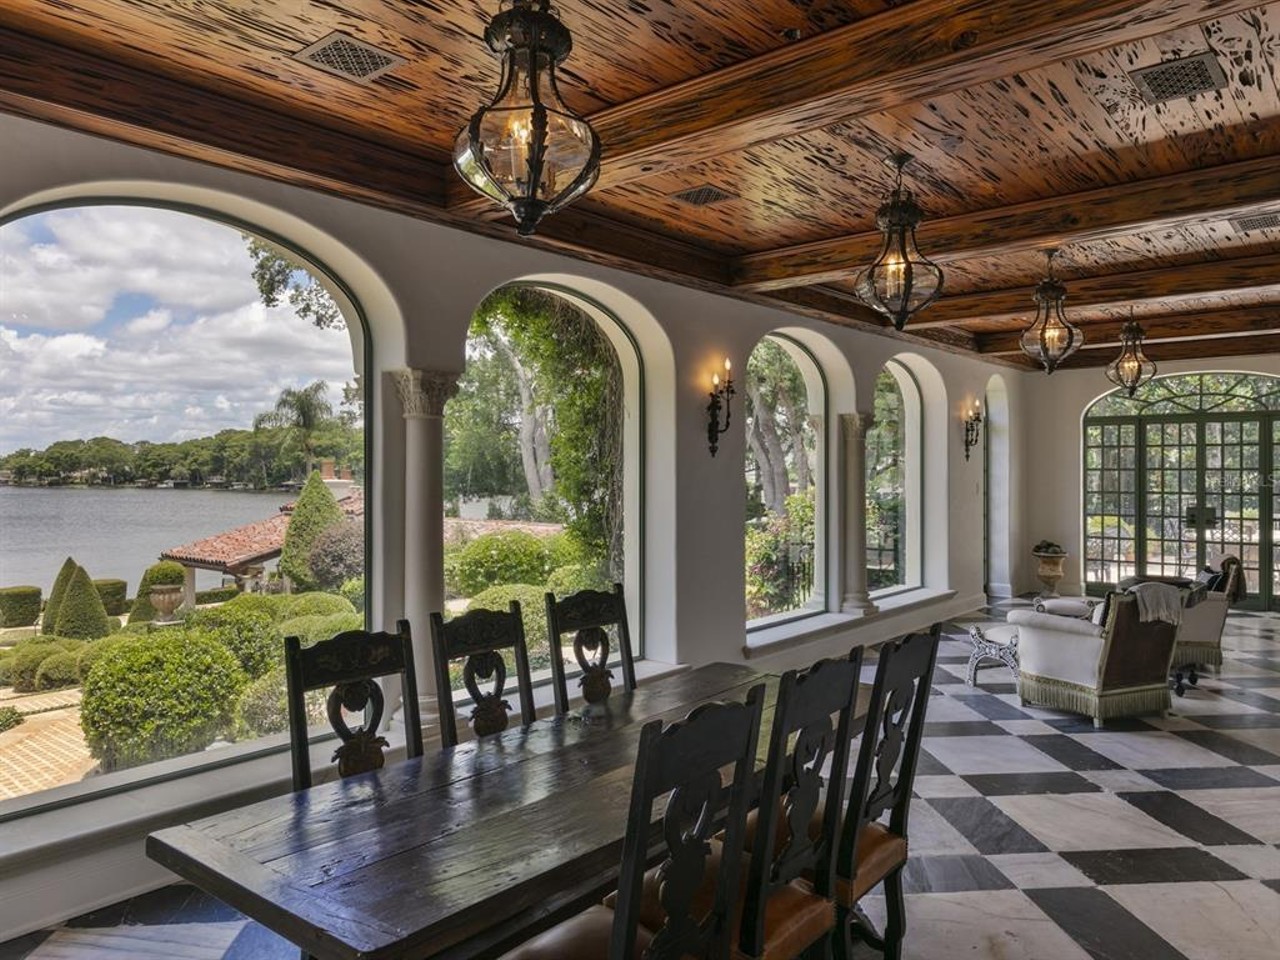 John Morgan's son bought the most expensive mansion in Winter Park